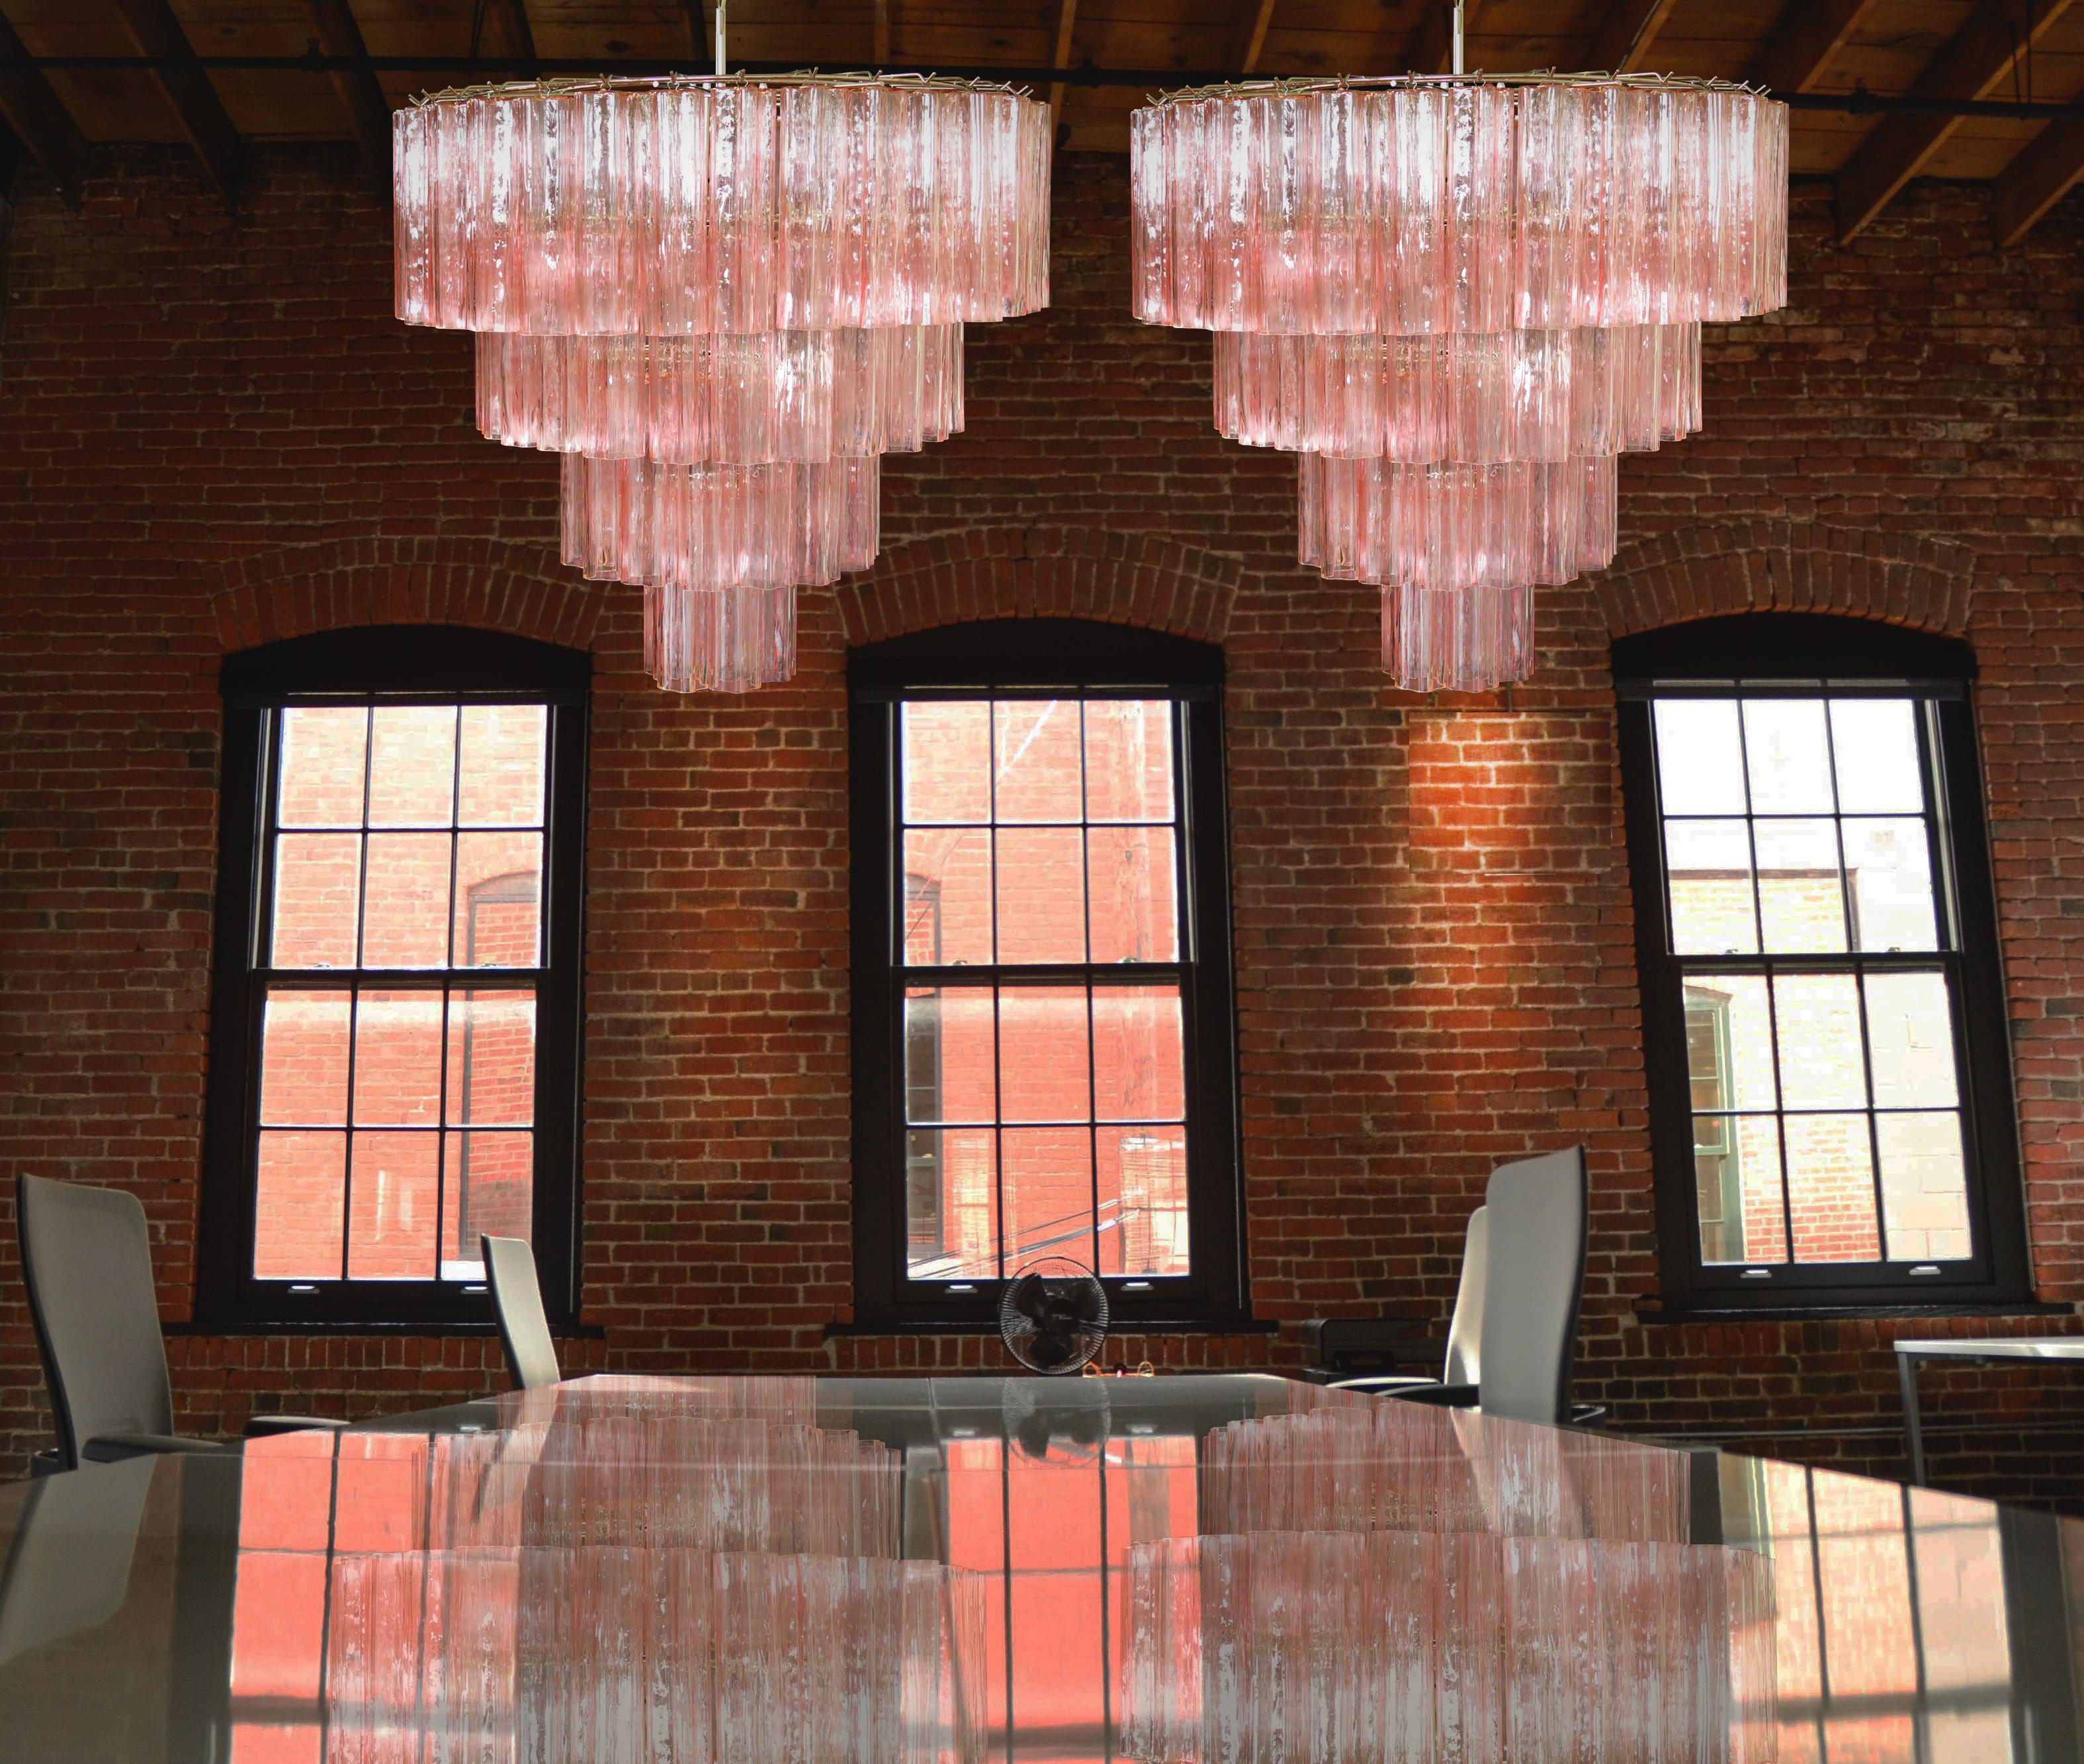 Italian chandelier in Murano glass and nickel-plated metal structure on 4 levels. The armor polished nickel supports 78 large pink glass tubes in a star shape.
Dimensions: 63 inches (160 cm) height with chain, 35.45 inches (90 cm) height without